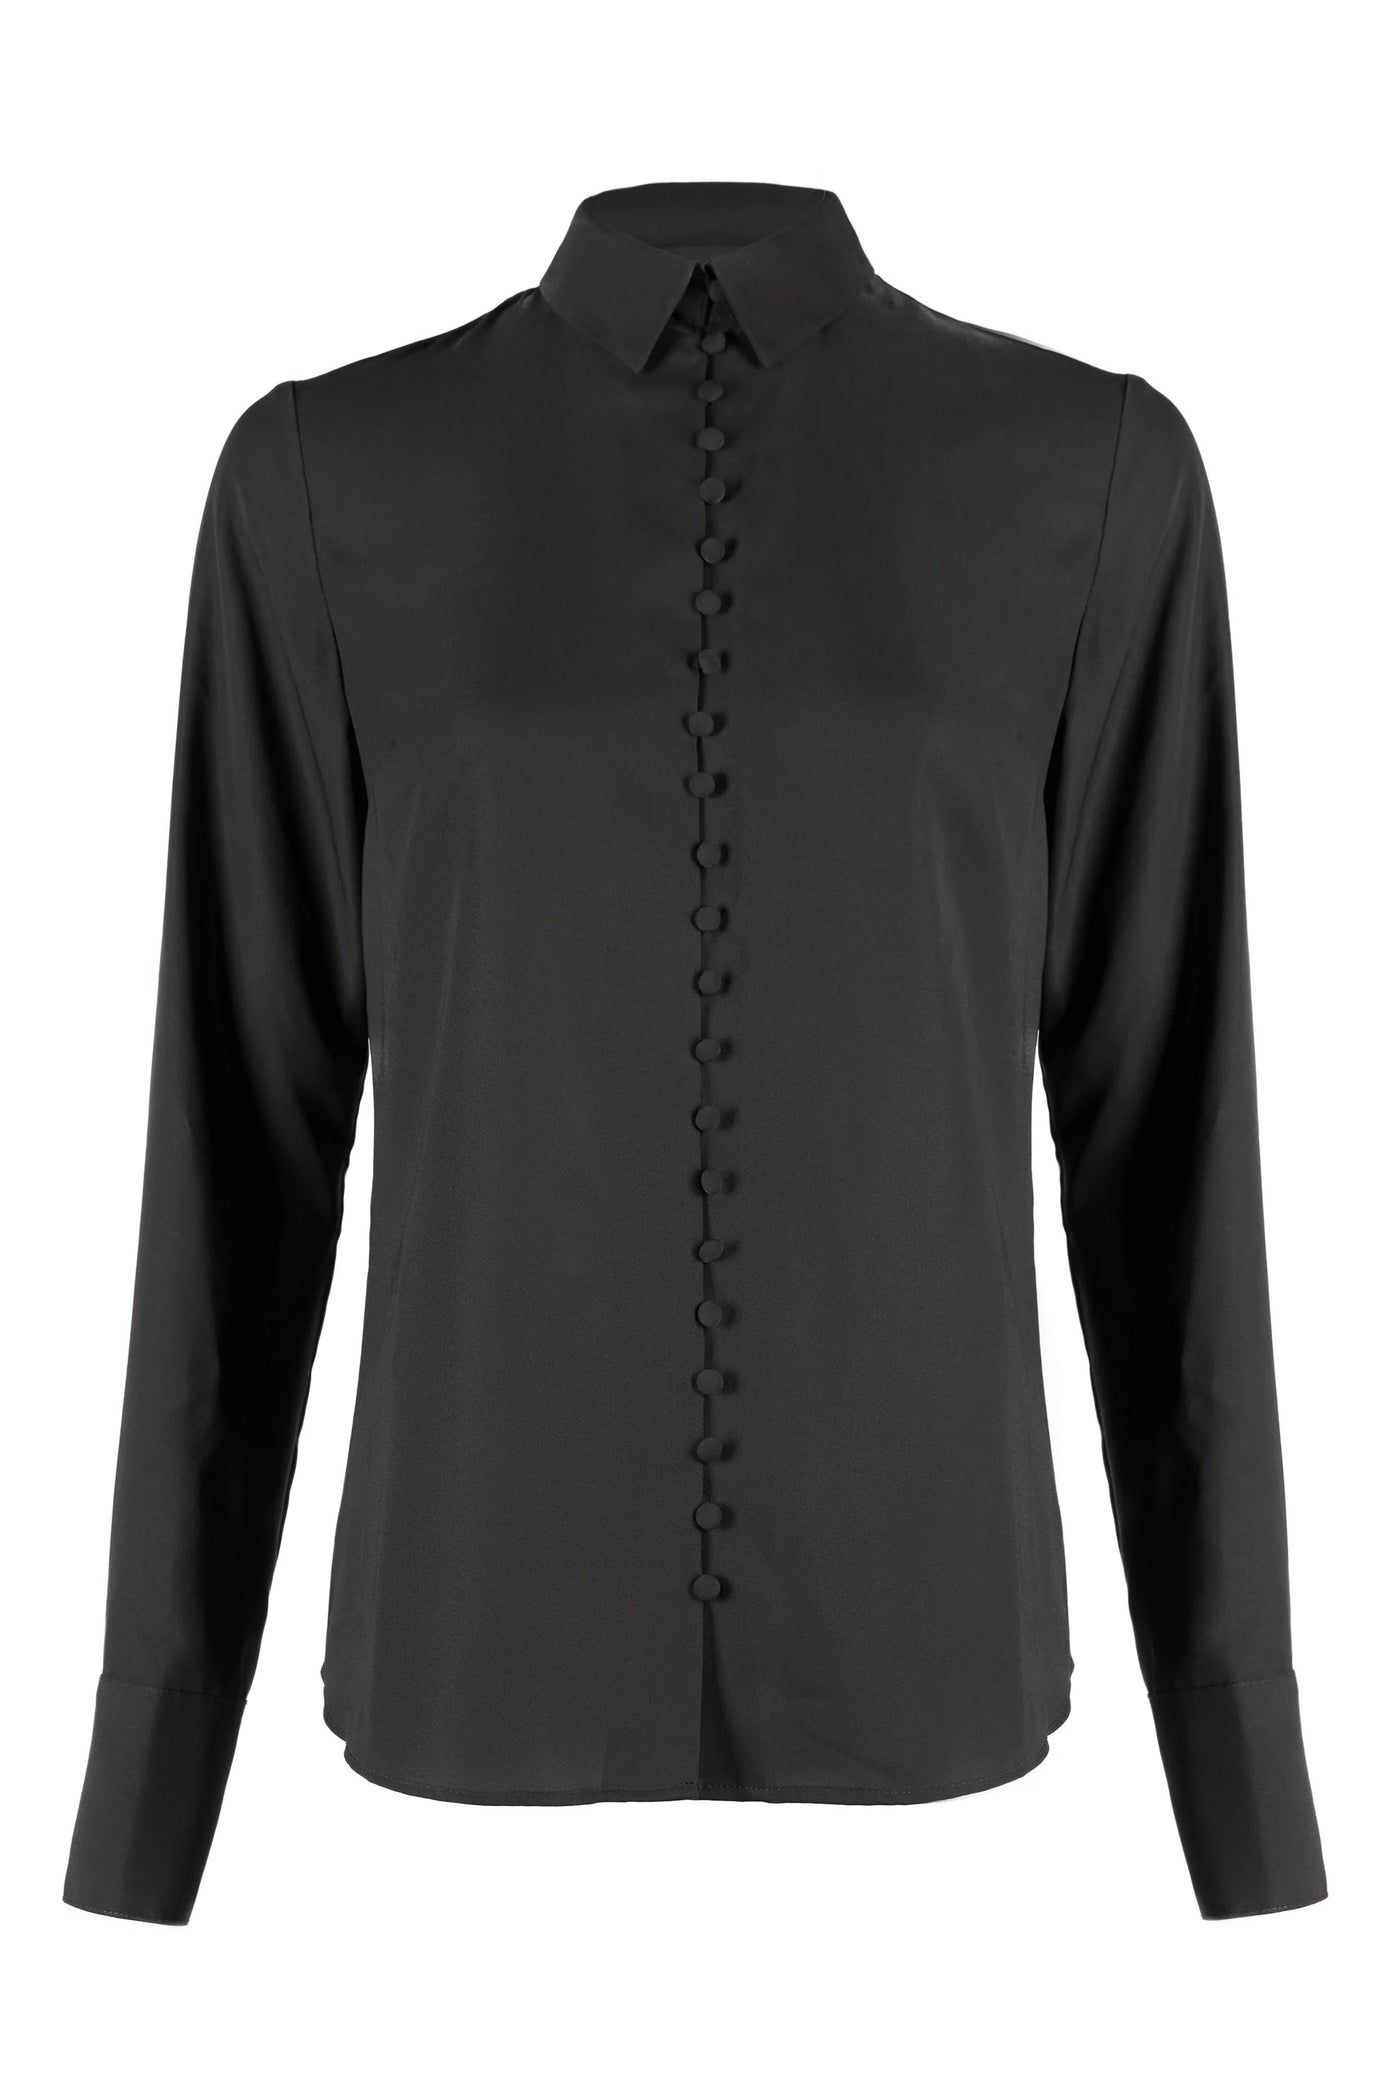 Holland Cooper Classic Button Shirt in Black